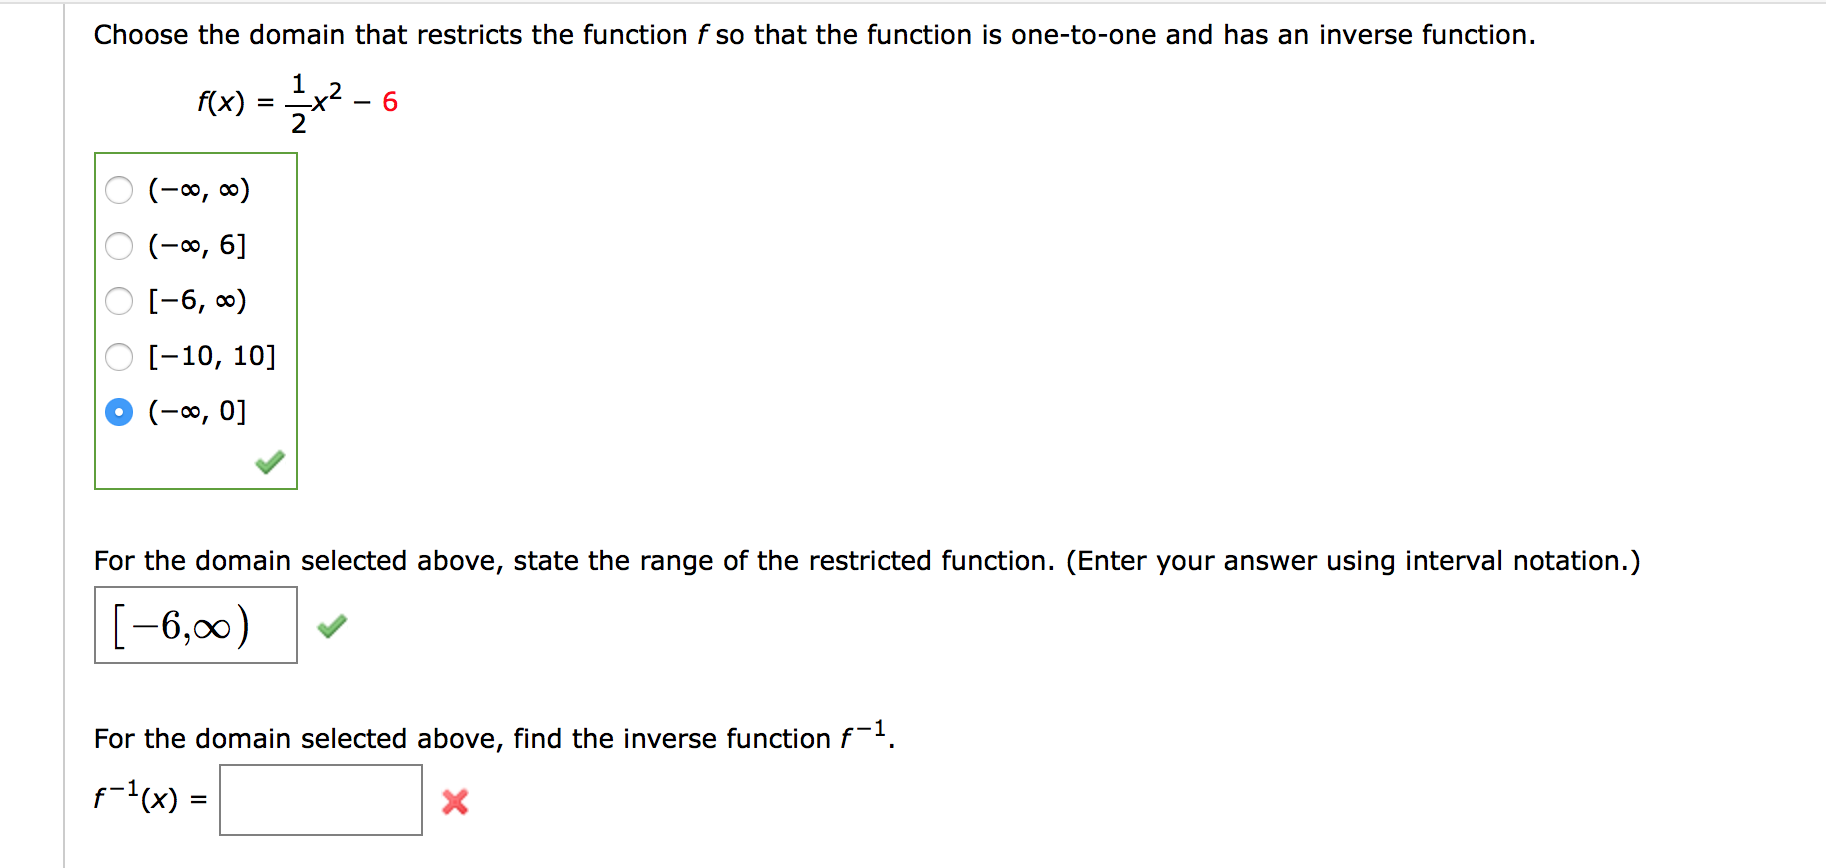 Choose the domain that restricts the function f so that the function is one-to-one and has an inverse function.
,2
f(x)
2
6.
(-∞, ∞)
(-0, 6]
O [-6, 0)
O [-10, 10]
(-∞, 0]
For the domain selected above, state the range of the restricted function. (Enter your answer using interval notation.)
[-6,00)
For the domain selected above, find the inverse function f-.
f-(x) =
